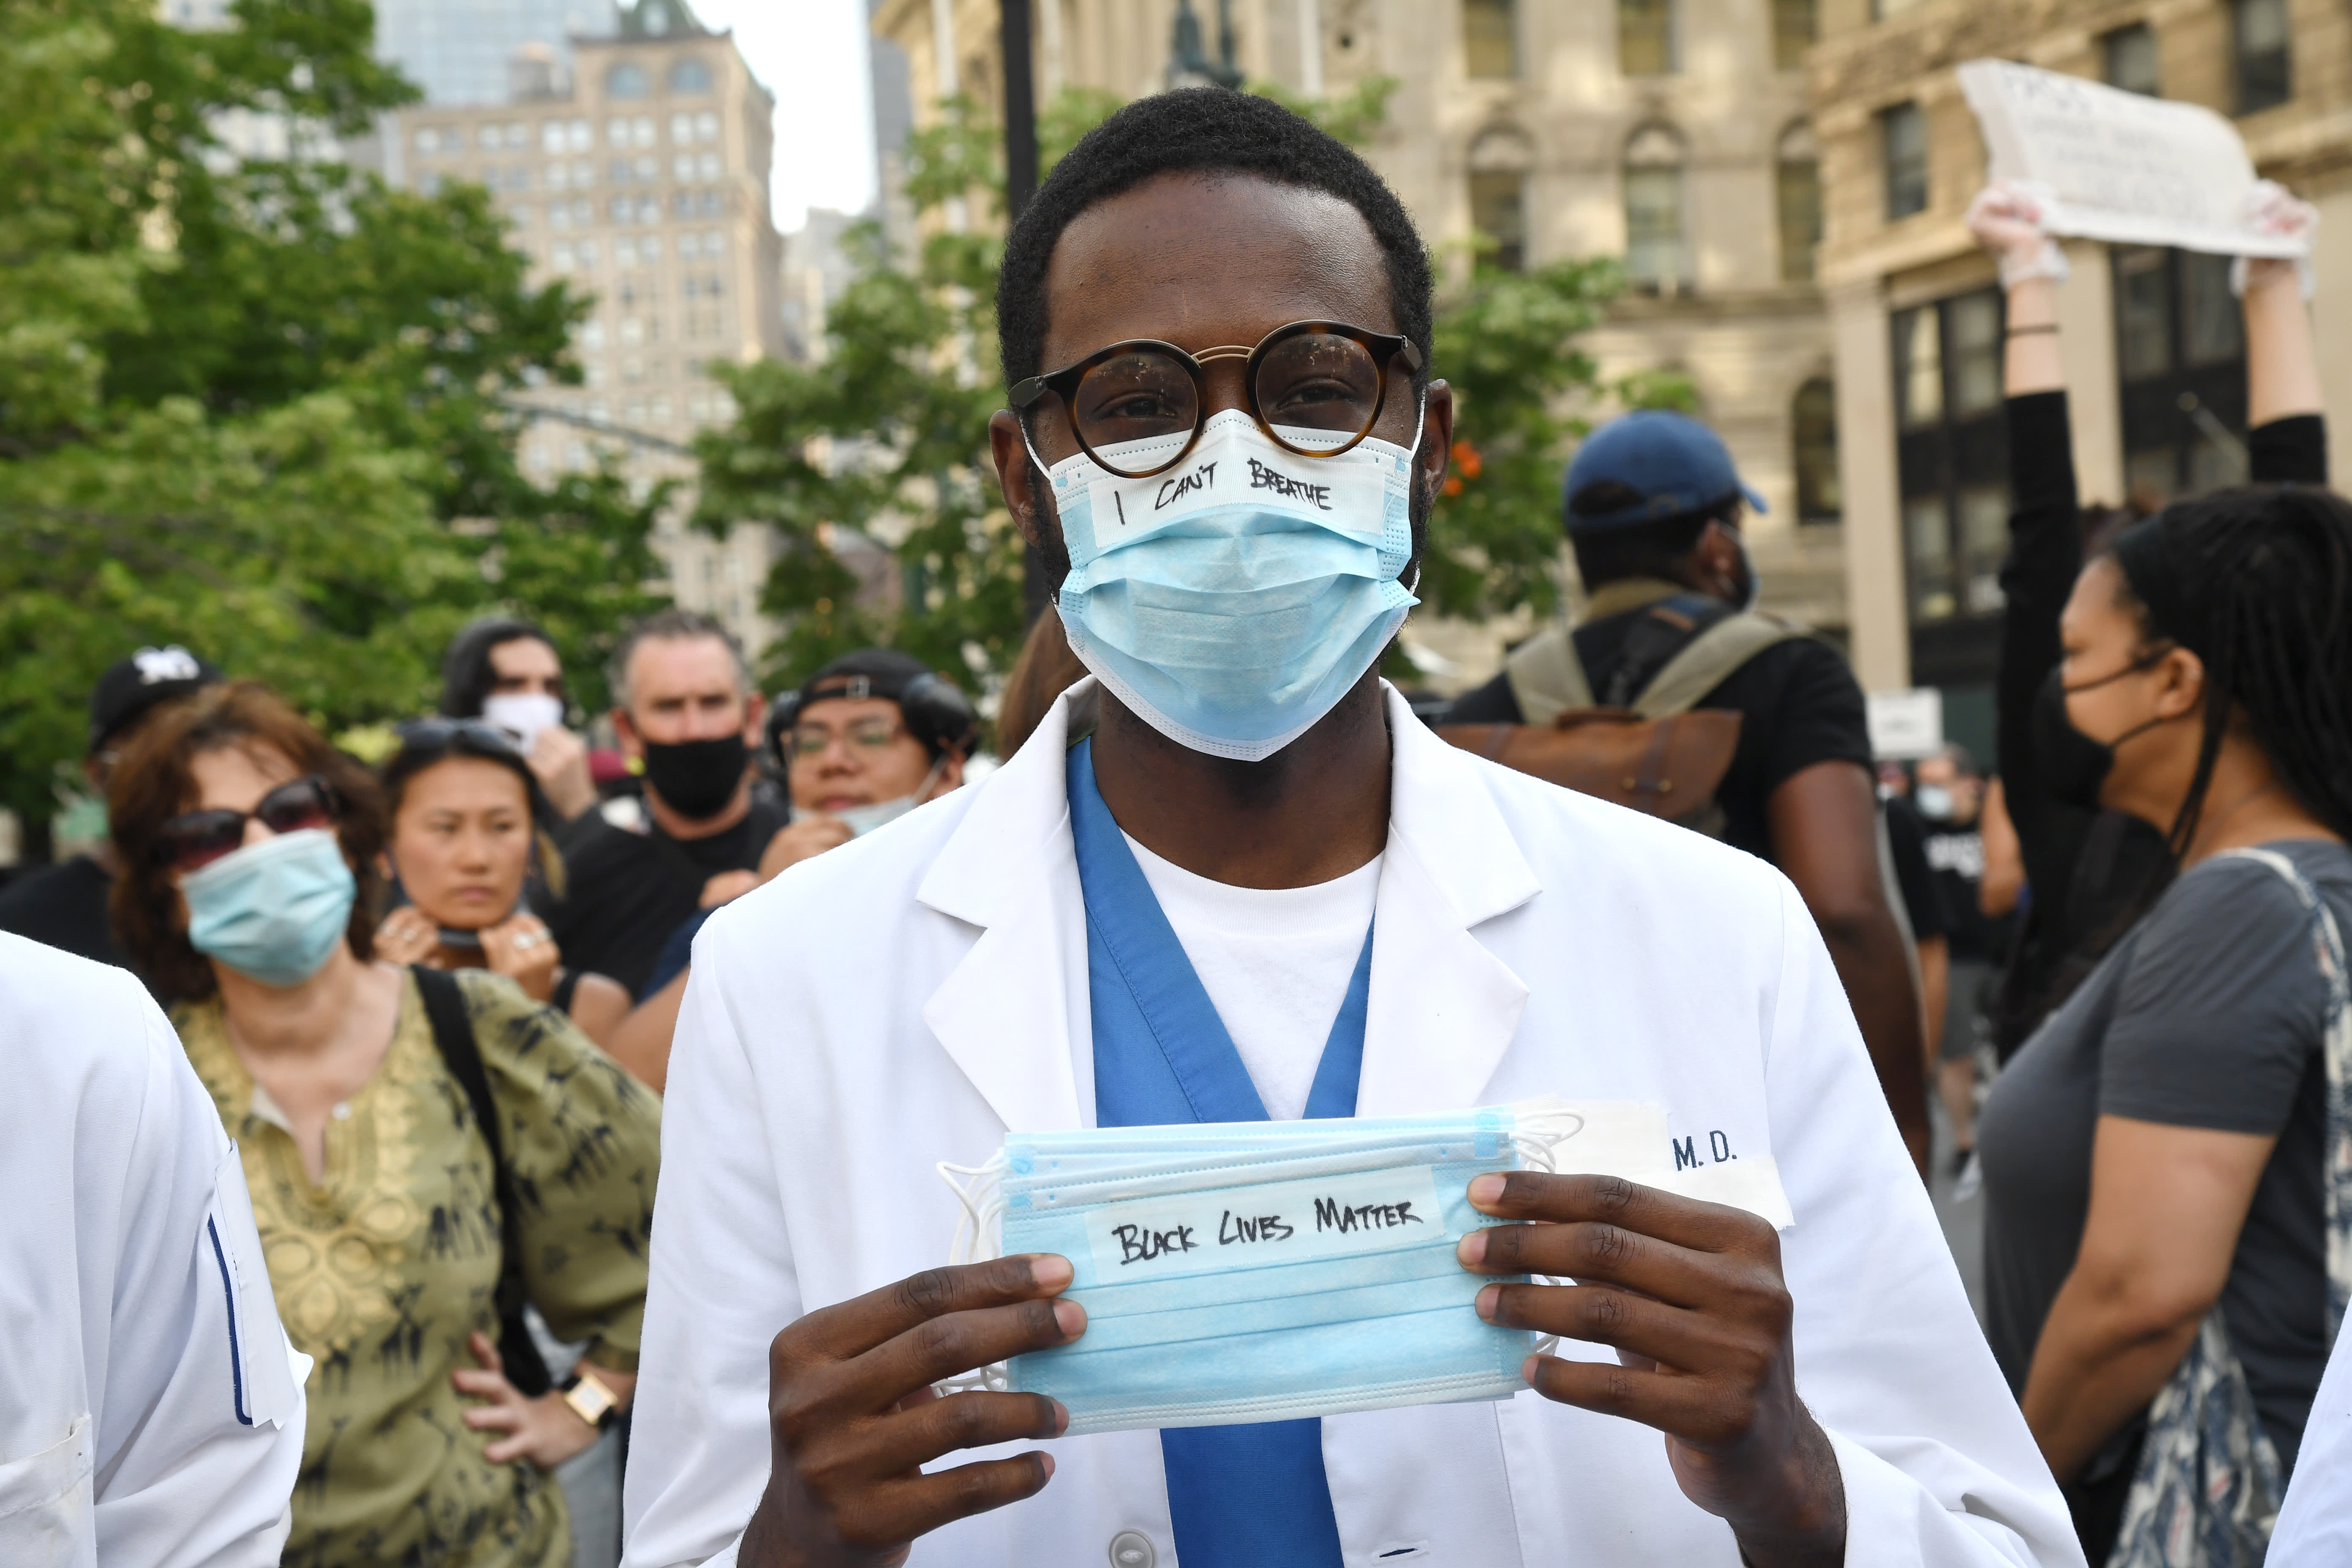 Doctors have tips to reduce the risk of catching the coronavirus during George Floyd protests - CNBC